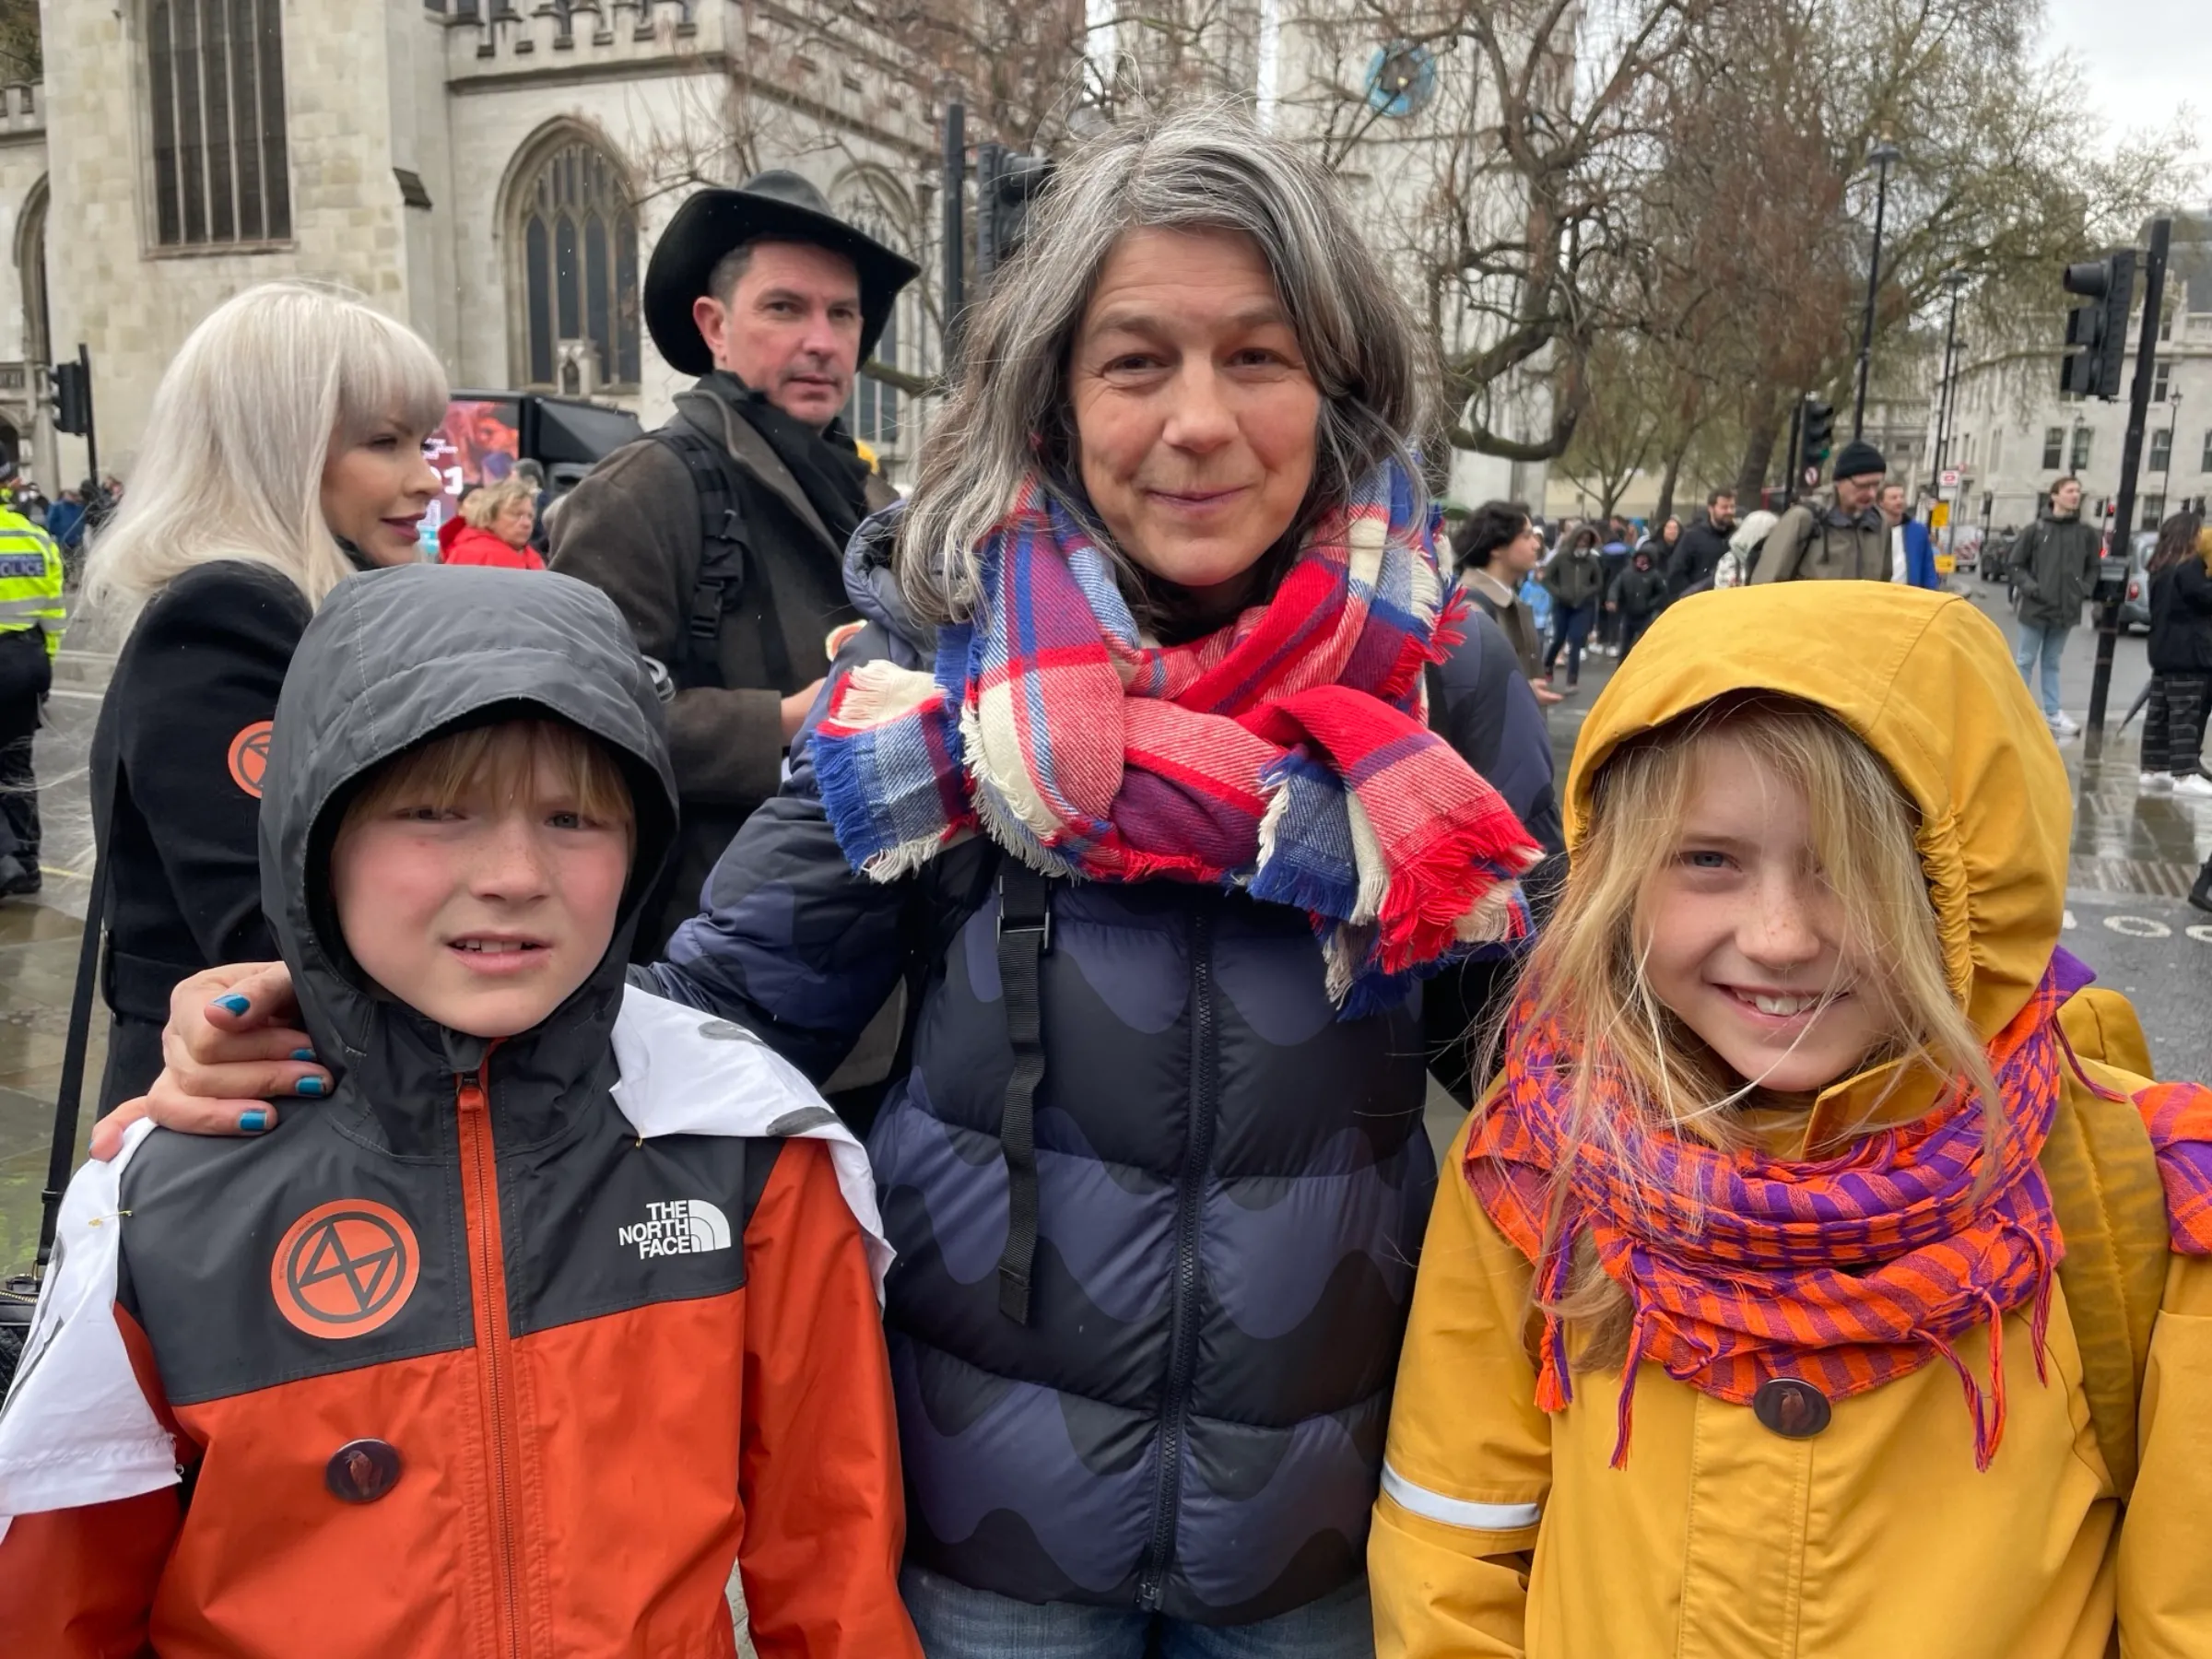 Family members Stanley, Zoe and Bella Kavanagh join “The Big One”, a protest organised by Extinction Rebellion outside Parliament in London on April 21, 2023. Thomson Reuters Foundation/Laurie Goering